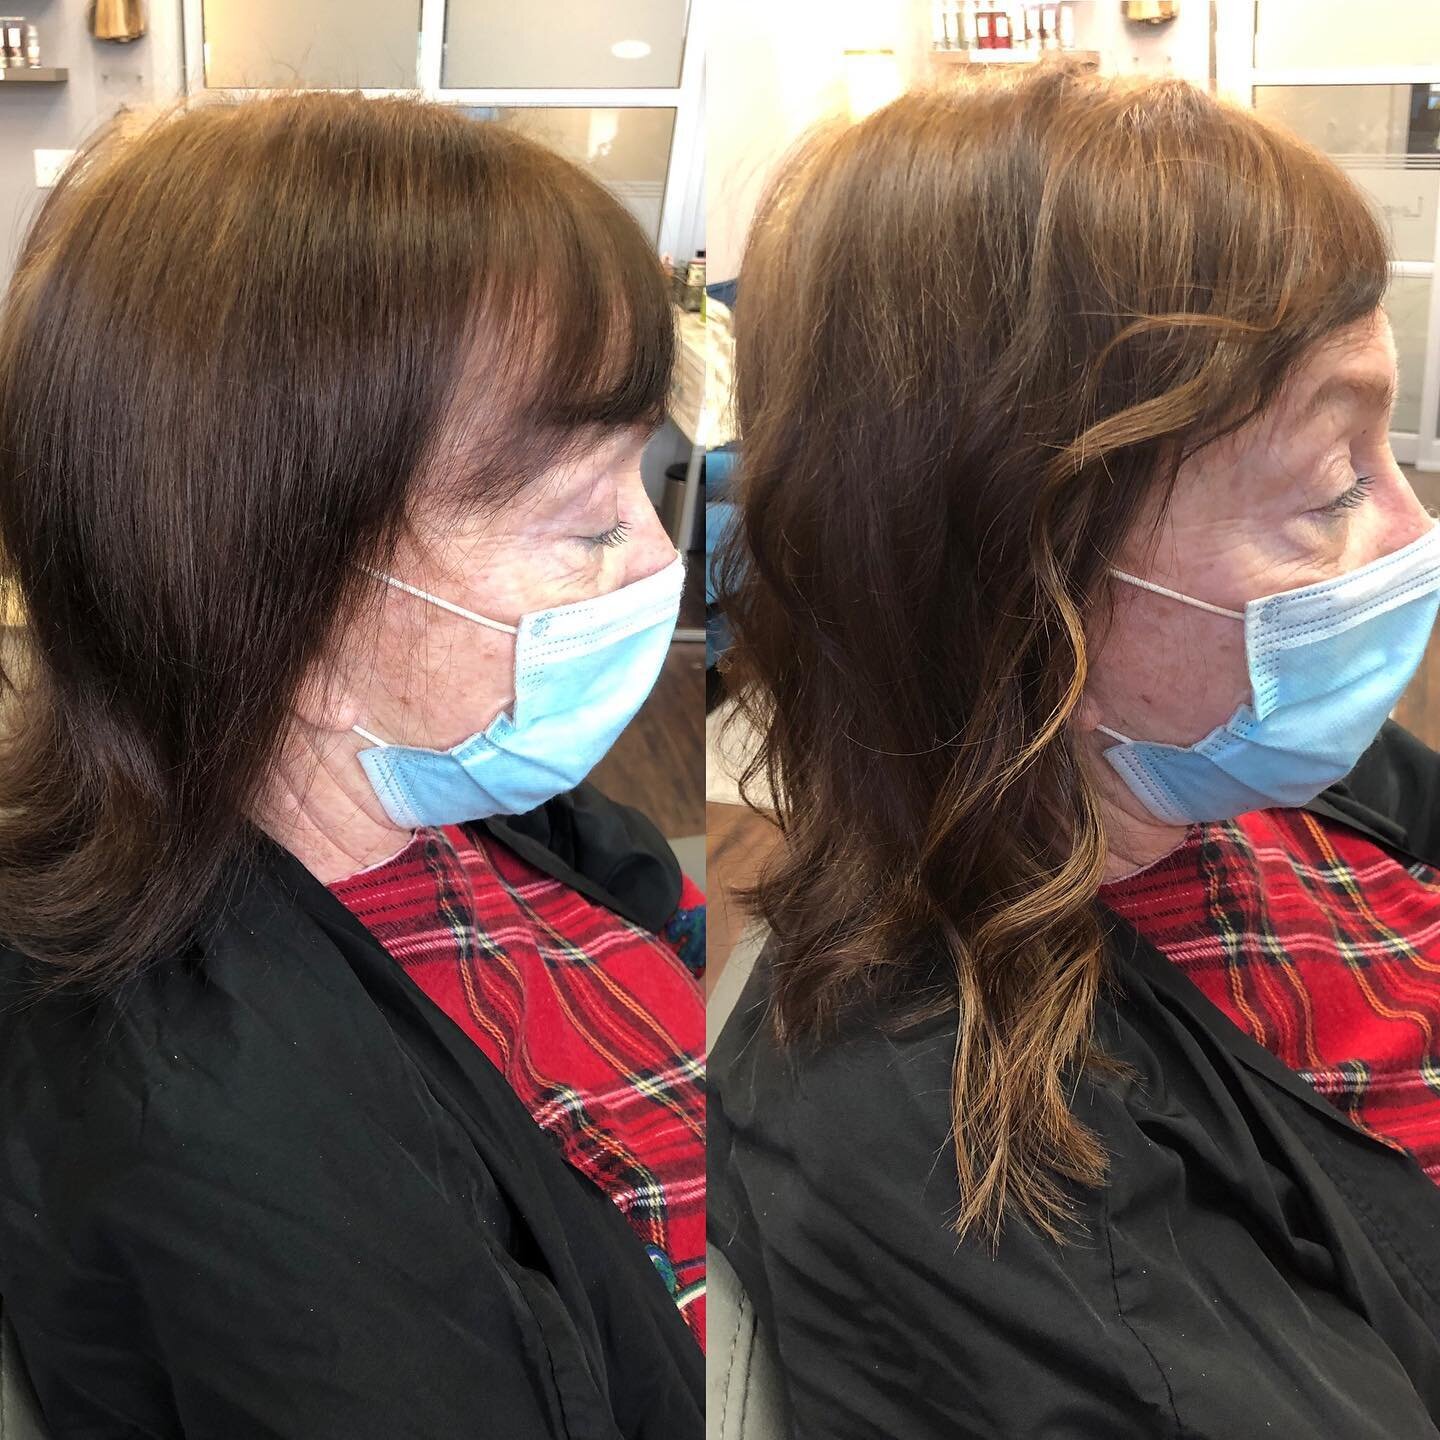 Some 2021 extension love at ya. We used one bundle of @greatlengthsusa hair extensions to add volume to the sides of this client. I really loved how it filled in her bang area!